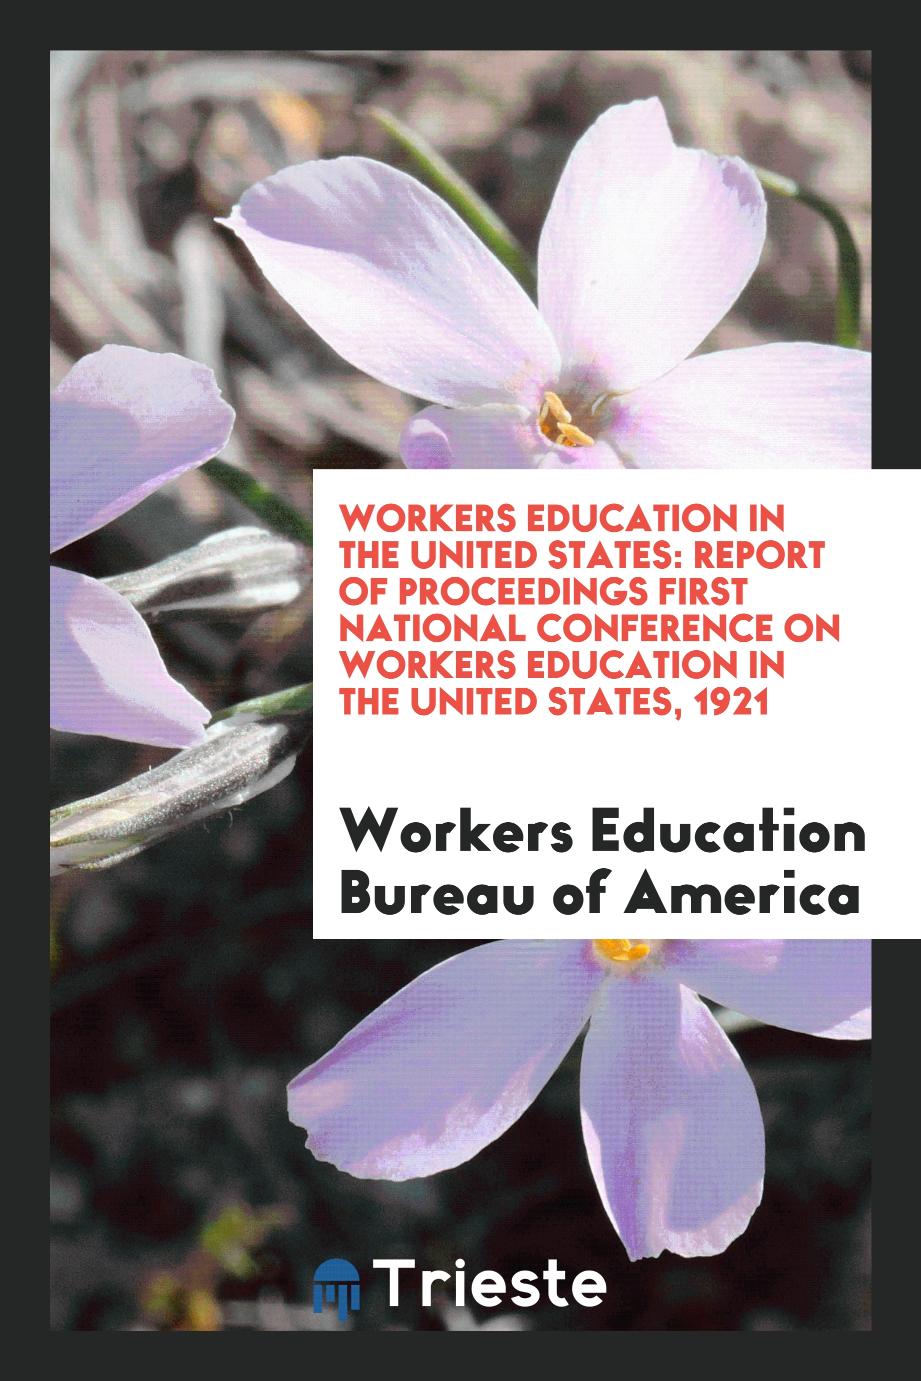 Workers Education in the United States: Report of Proceedings First National Conference on Workers Education in the United States, 1921